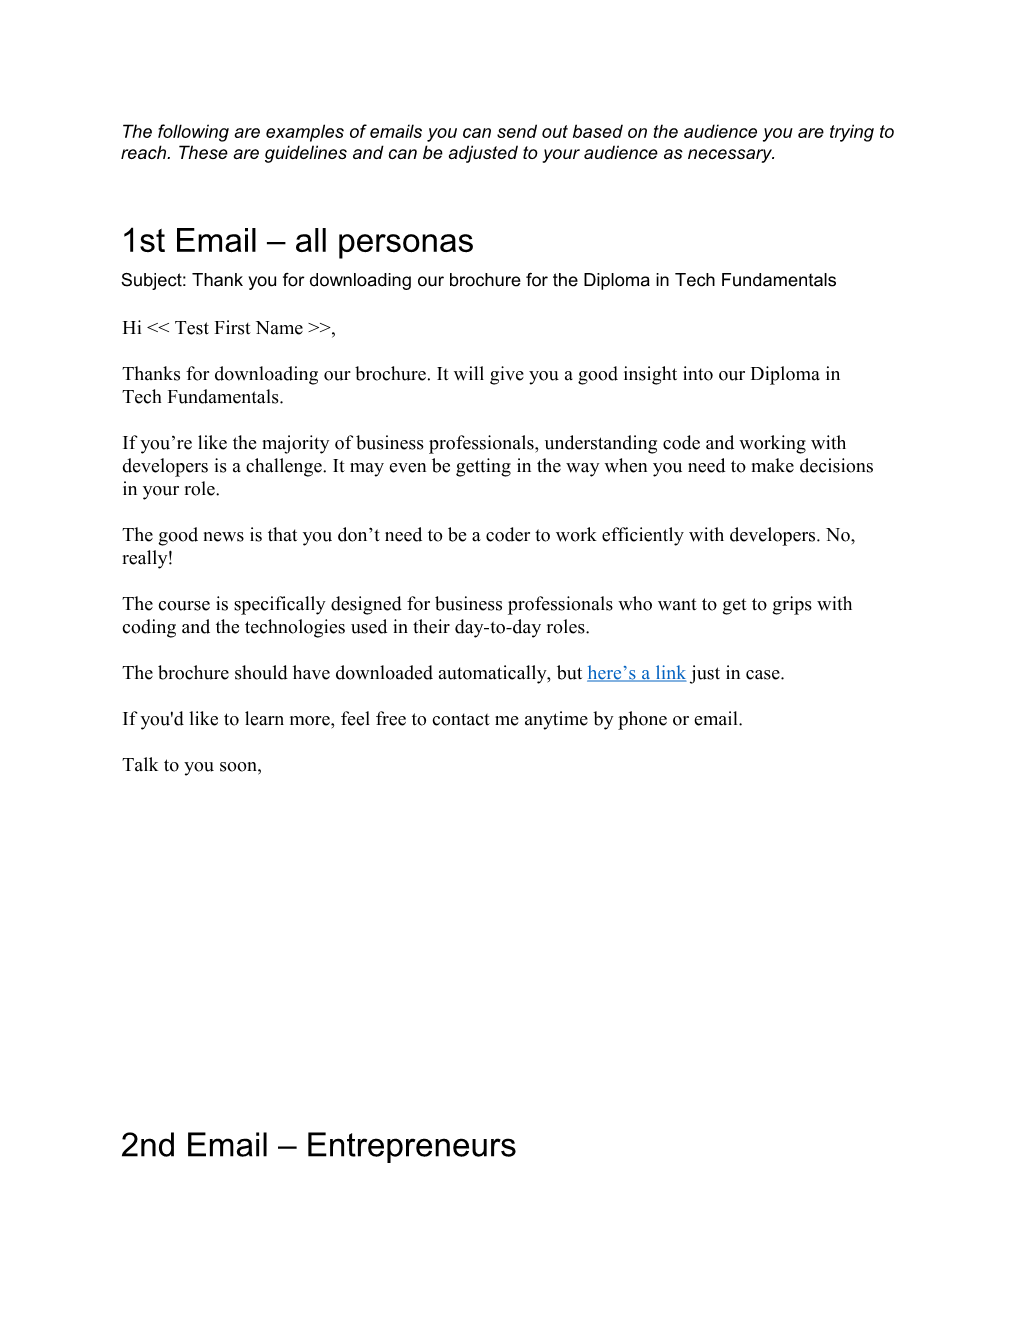 The Following Are Examples of Emails You Can Send out Based on the Audience You Are Trying